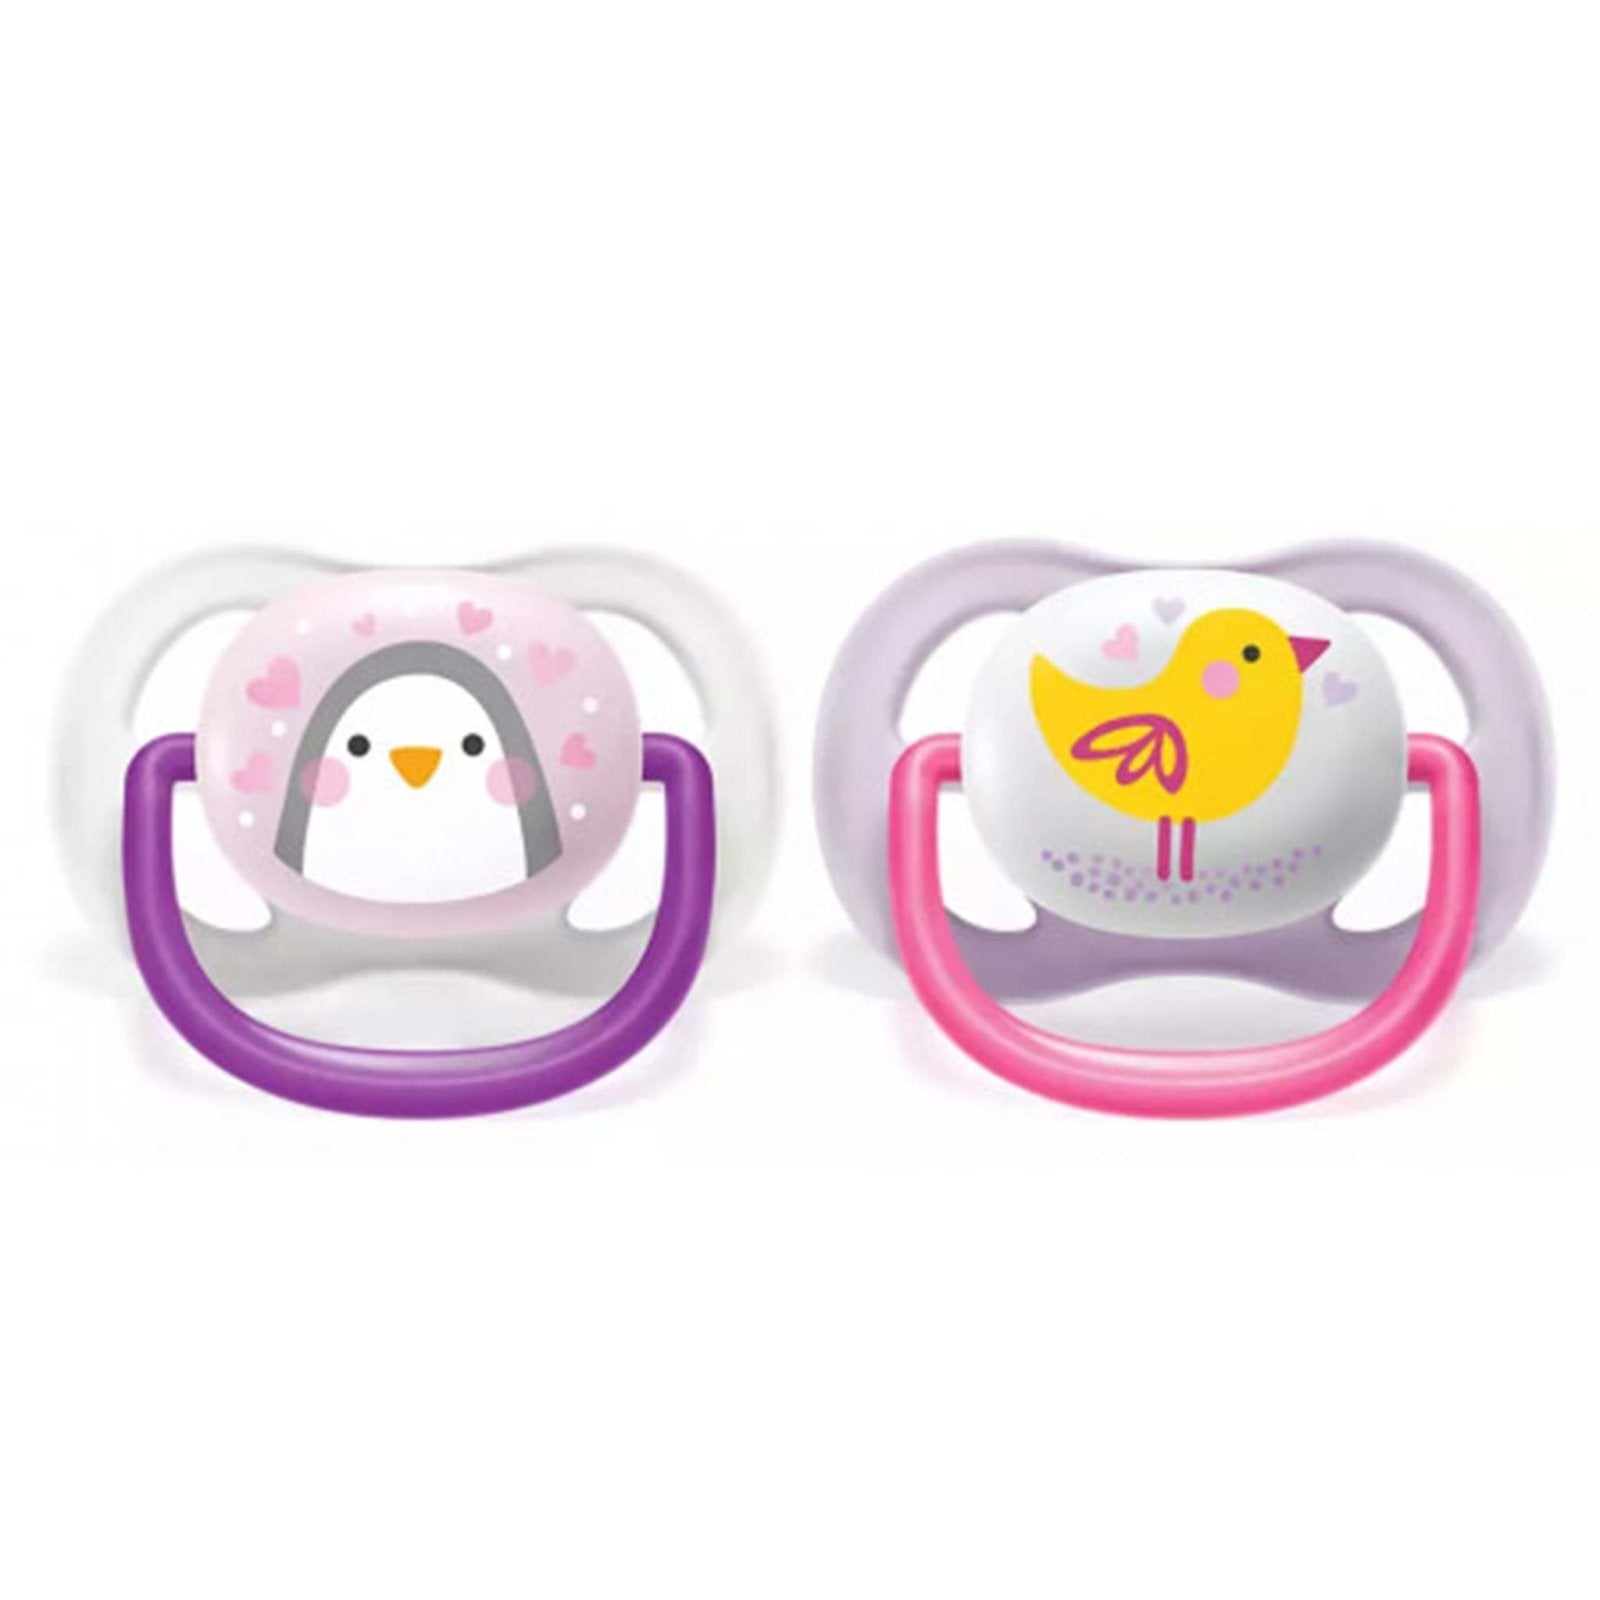 Ultra Air 6-18m pacifier Sparrow Print by Avent